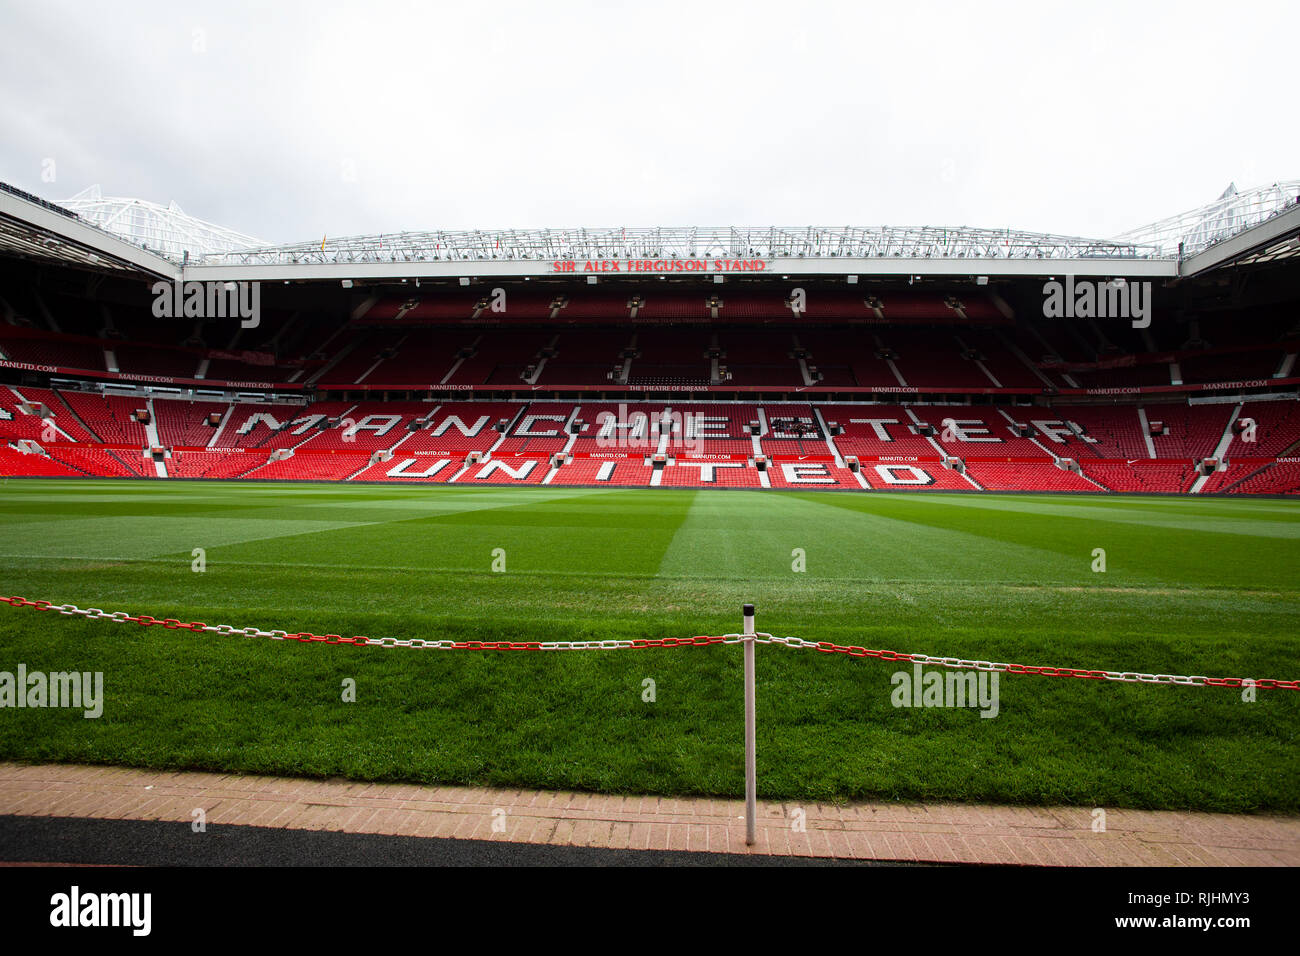 View inside the Old Trafford football stadium of Manchester United 'Theatre of Dreams' on a non match day Stock Photo